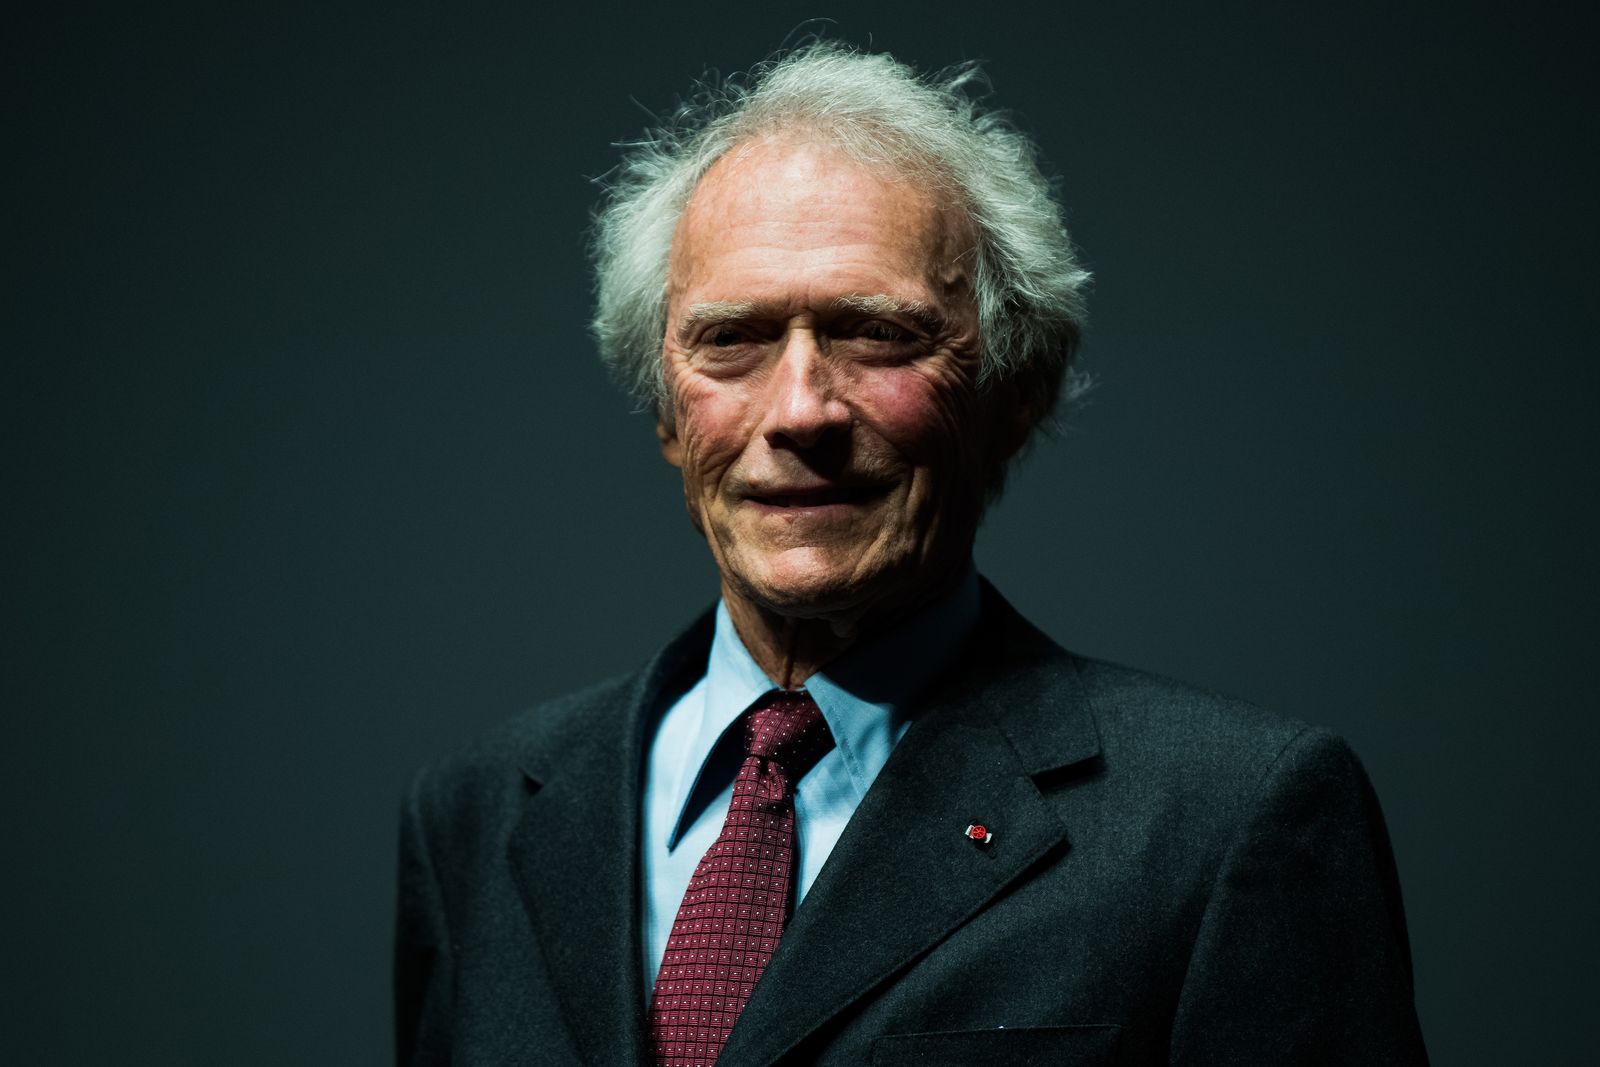 Clint Eastwood on stage during the 'Unforgiven' restored copy presentation during the 70th annual Cannes Film Festival at Salle Debussy on May 20, 2017 | Photo: Getty Images